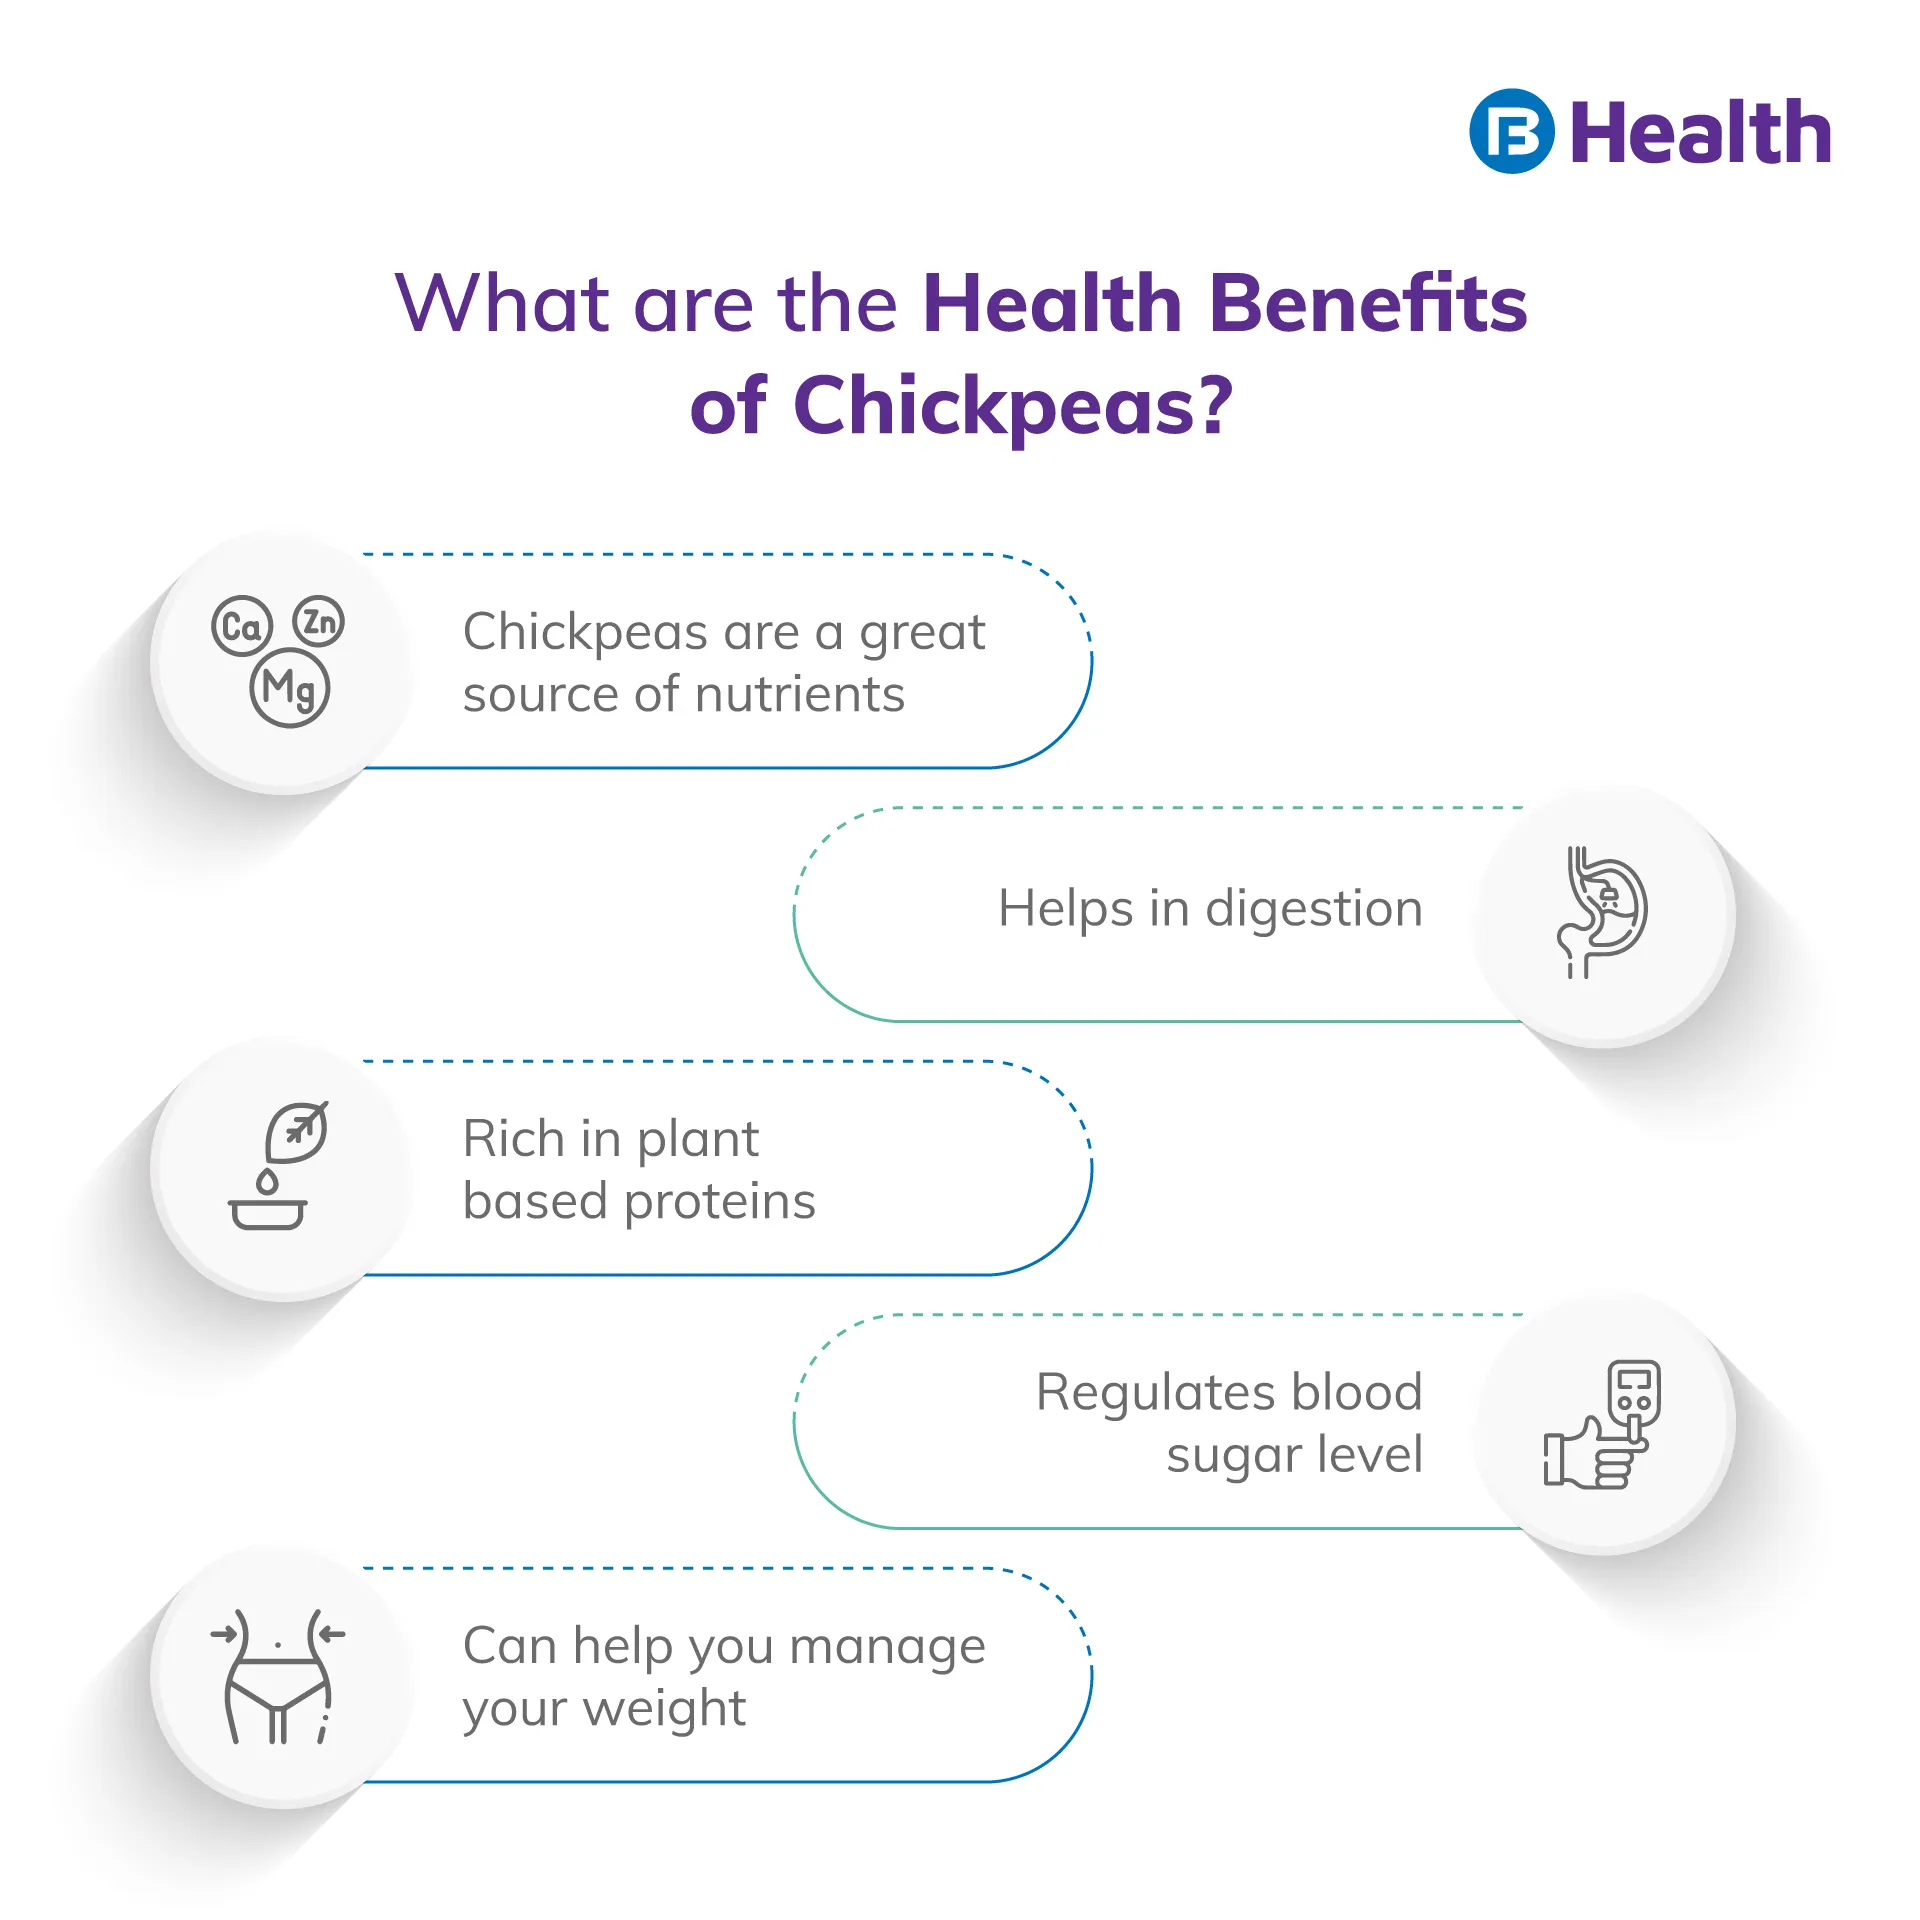 what are the health benefits of Chickpeas